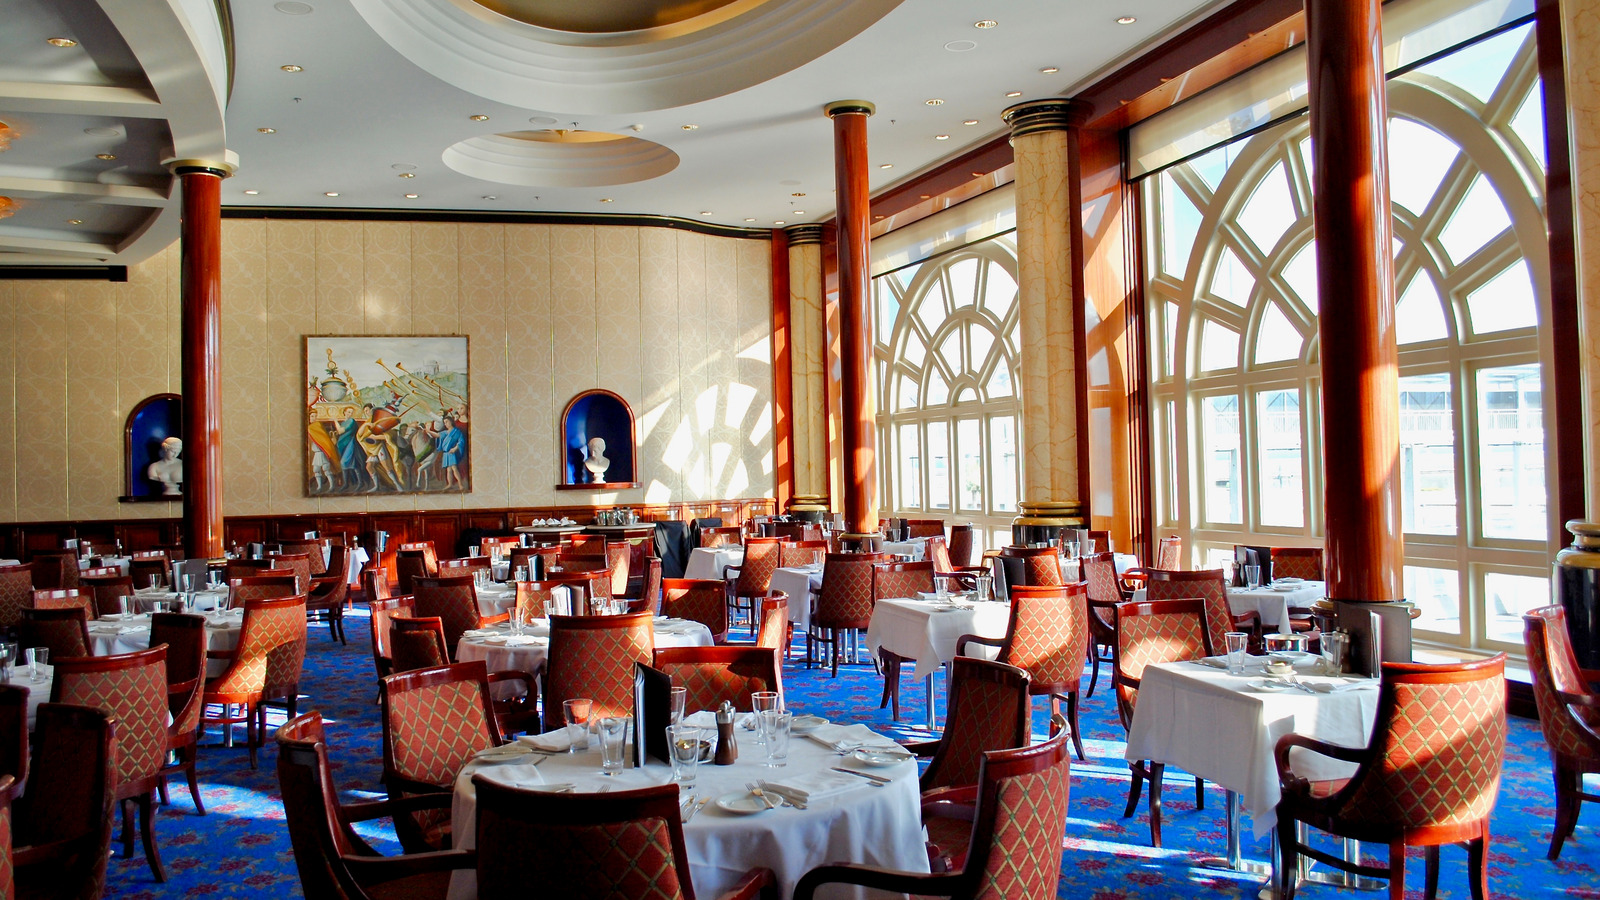 What Are Specialty Restaurants On Cruise Ships?